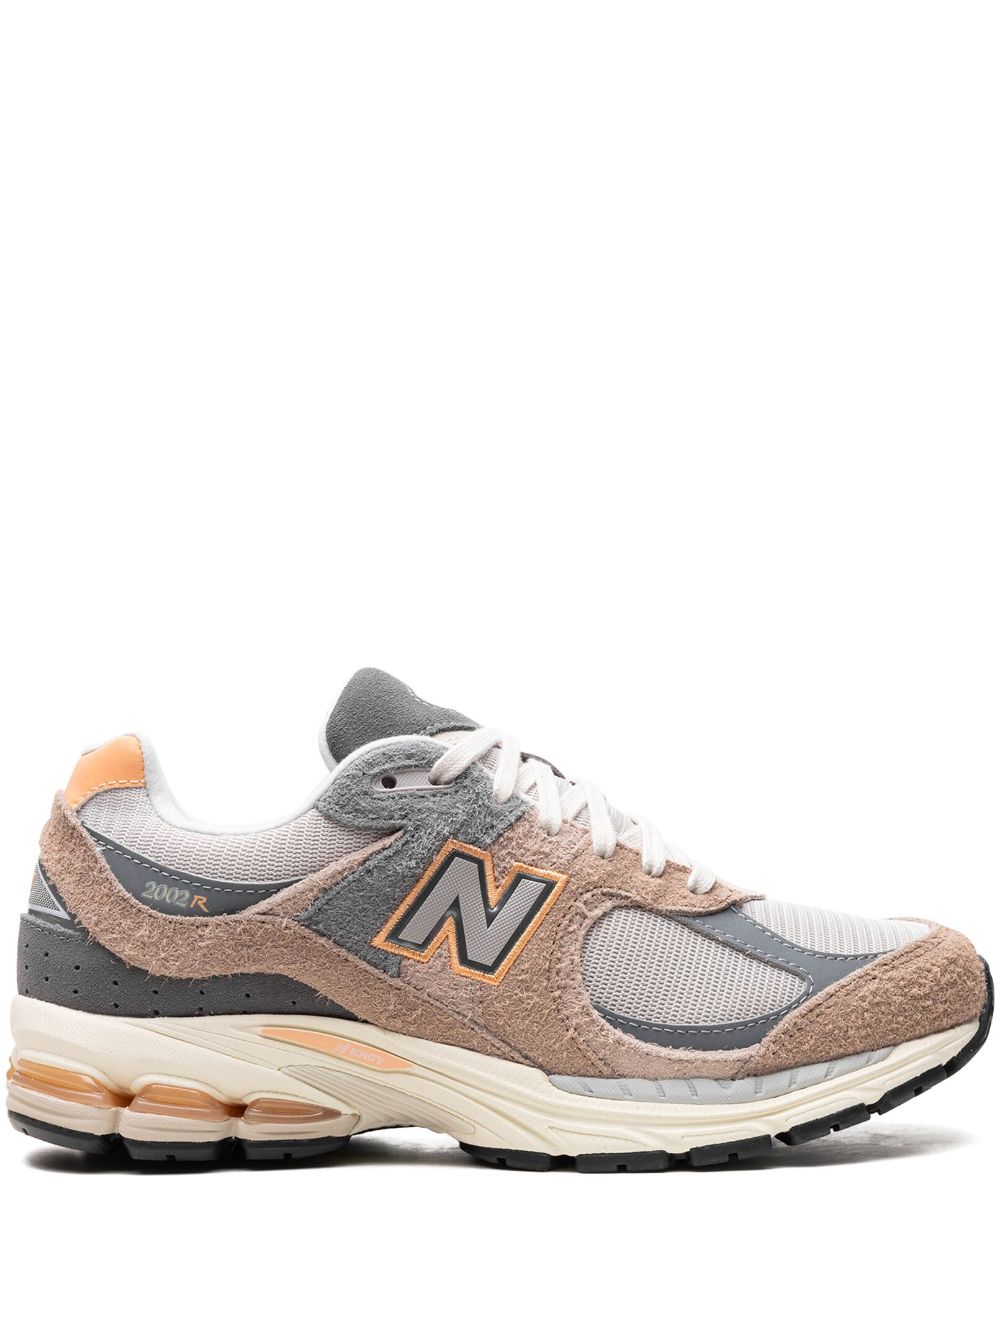 New Balance 2002r Low-top Sneakers In Brown